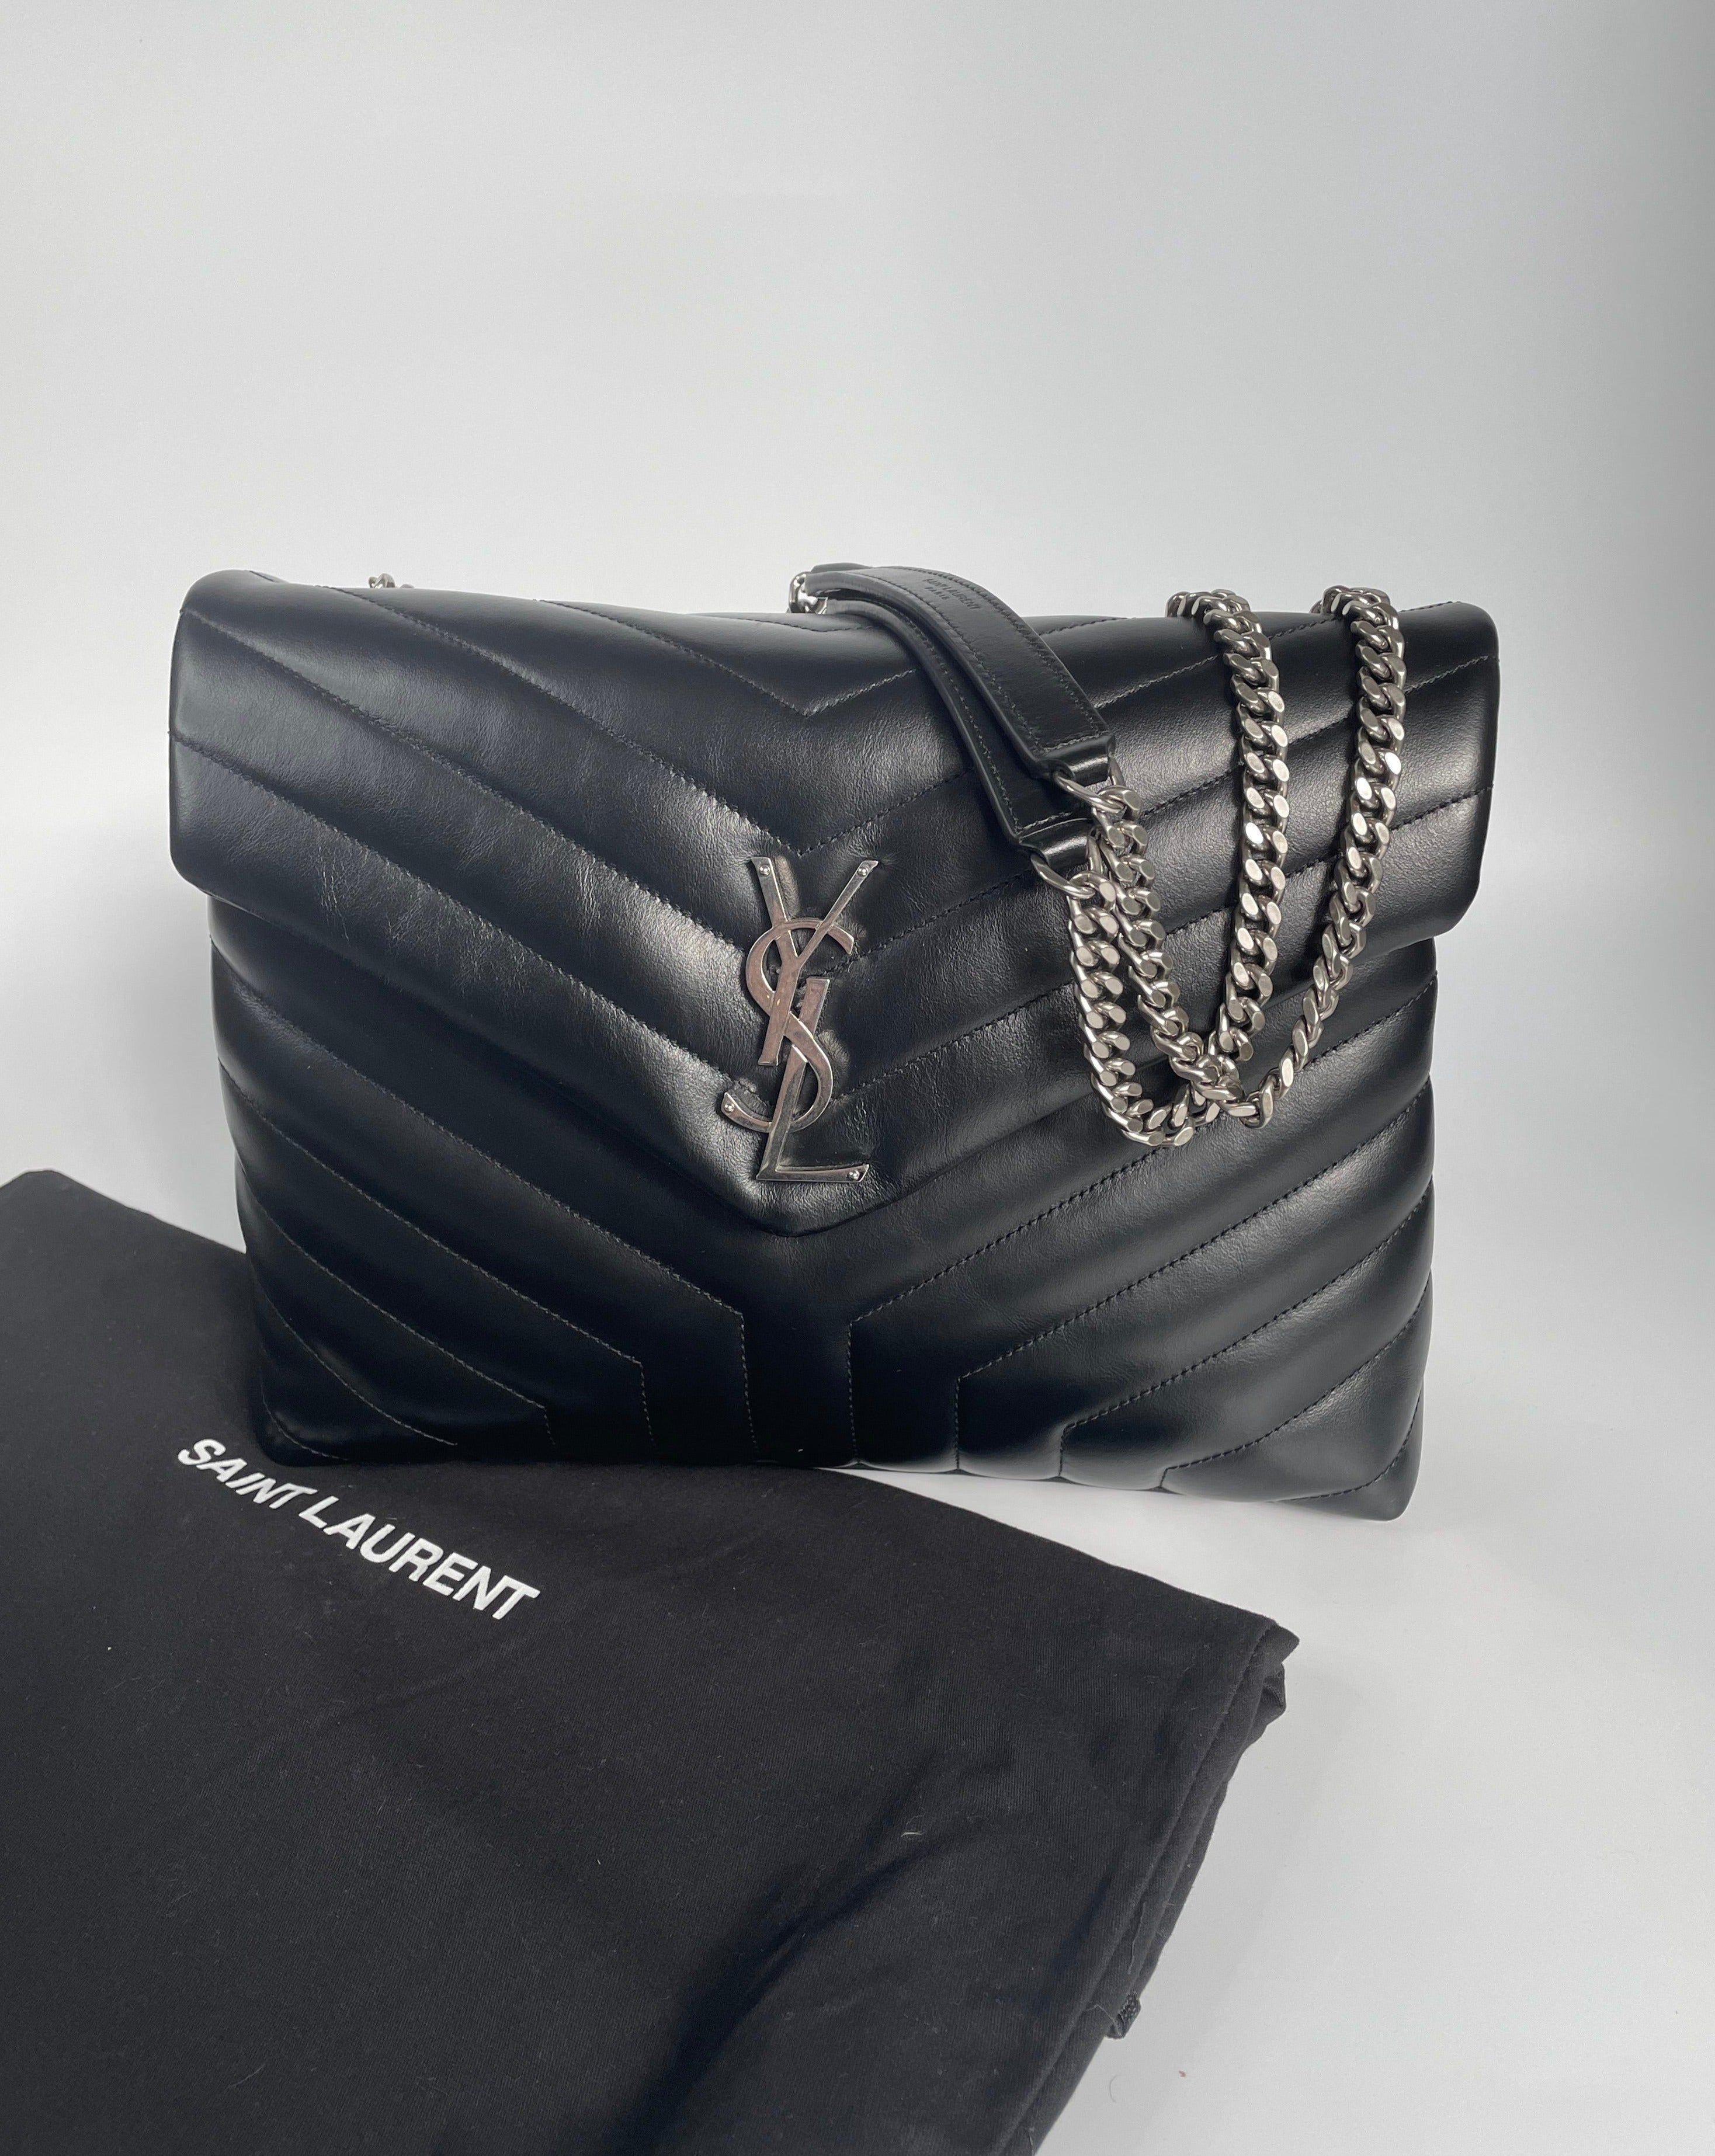 YSL Black LouLou Document Clutch Silver Hardware. Made in Italy. With care  cards, dustbag & certificate of authenticity from ENTRUPY ❤️ - Canon E-Bags  Prime